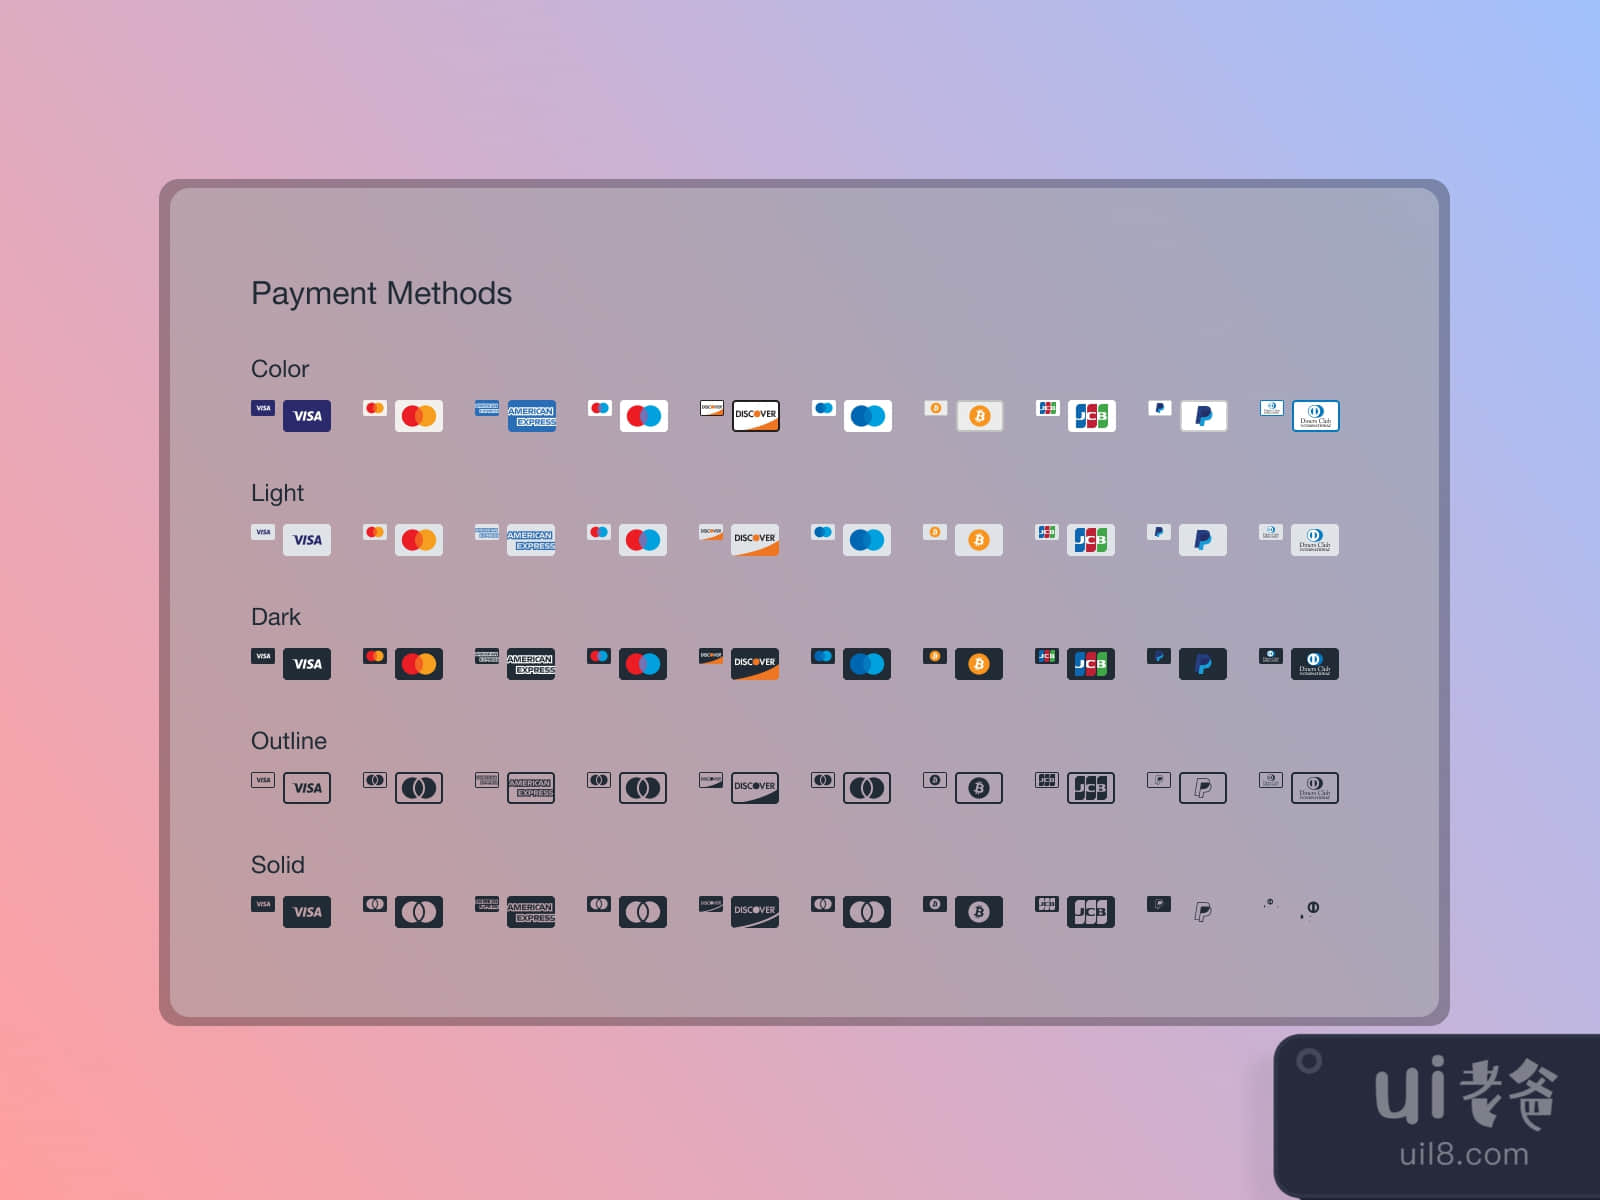 Payment Methods for Figma and Adobe XD No 2